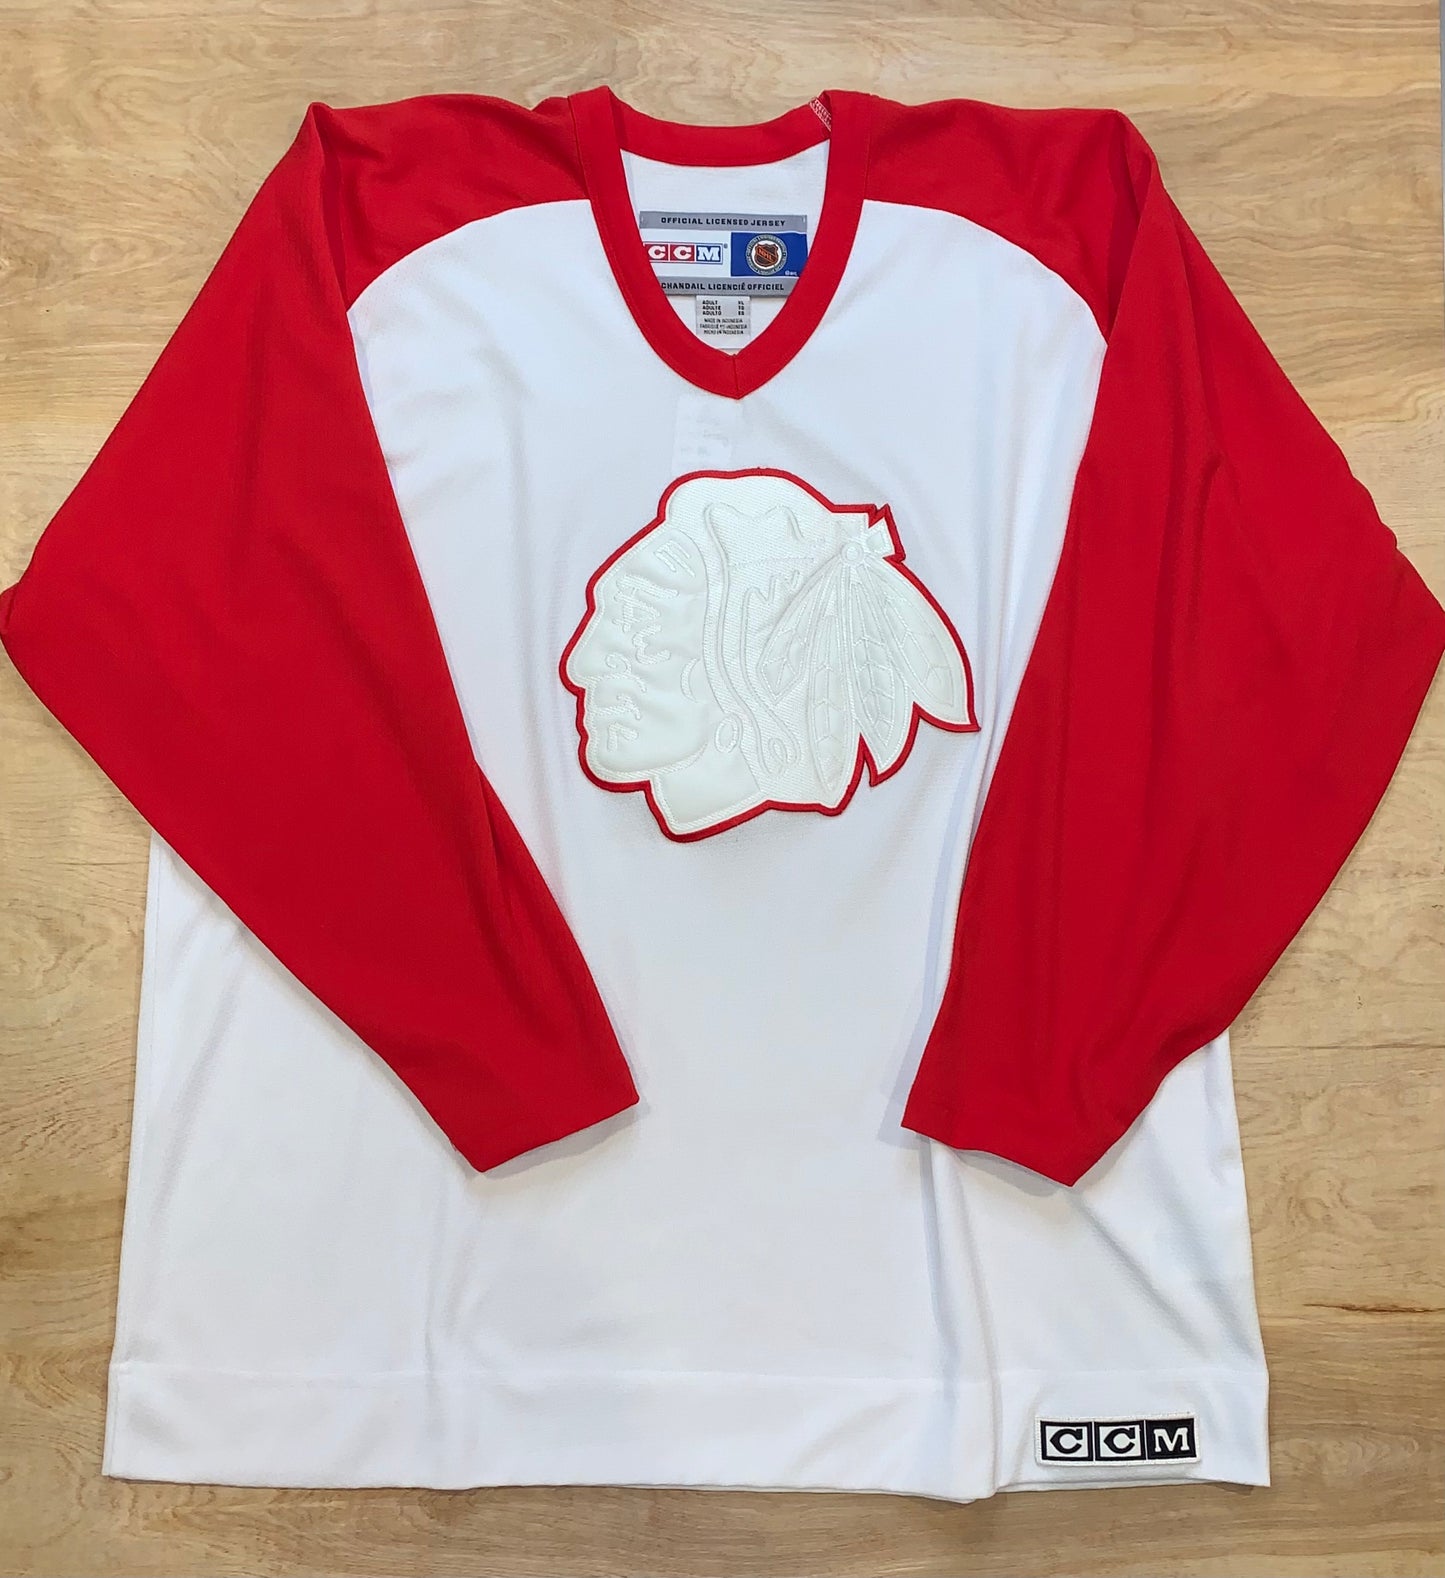 Chicago Blackhawks "white out" Jersey